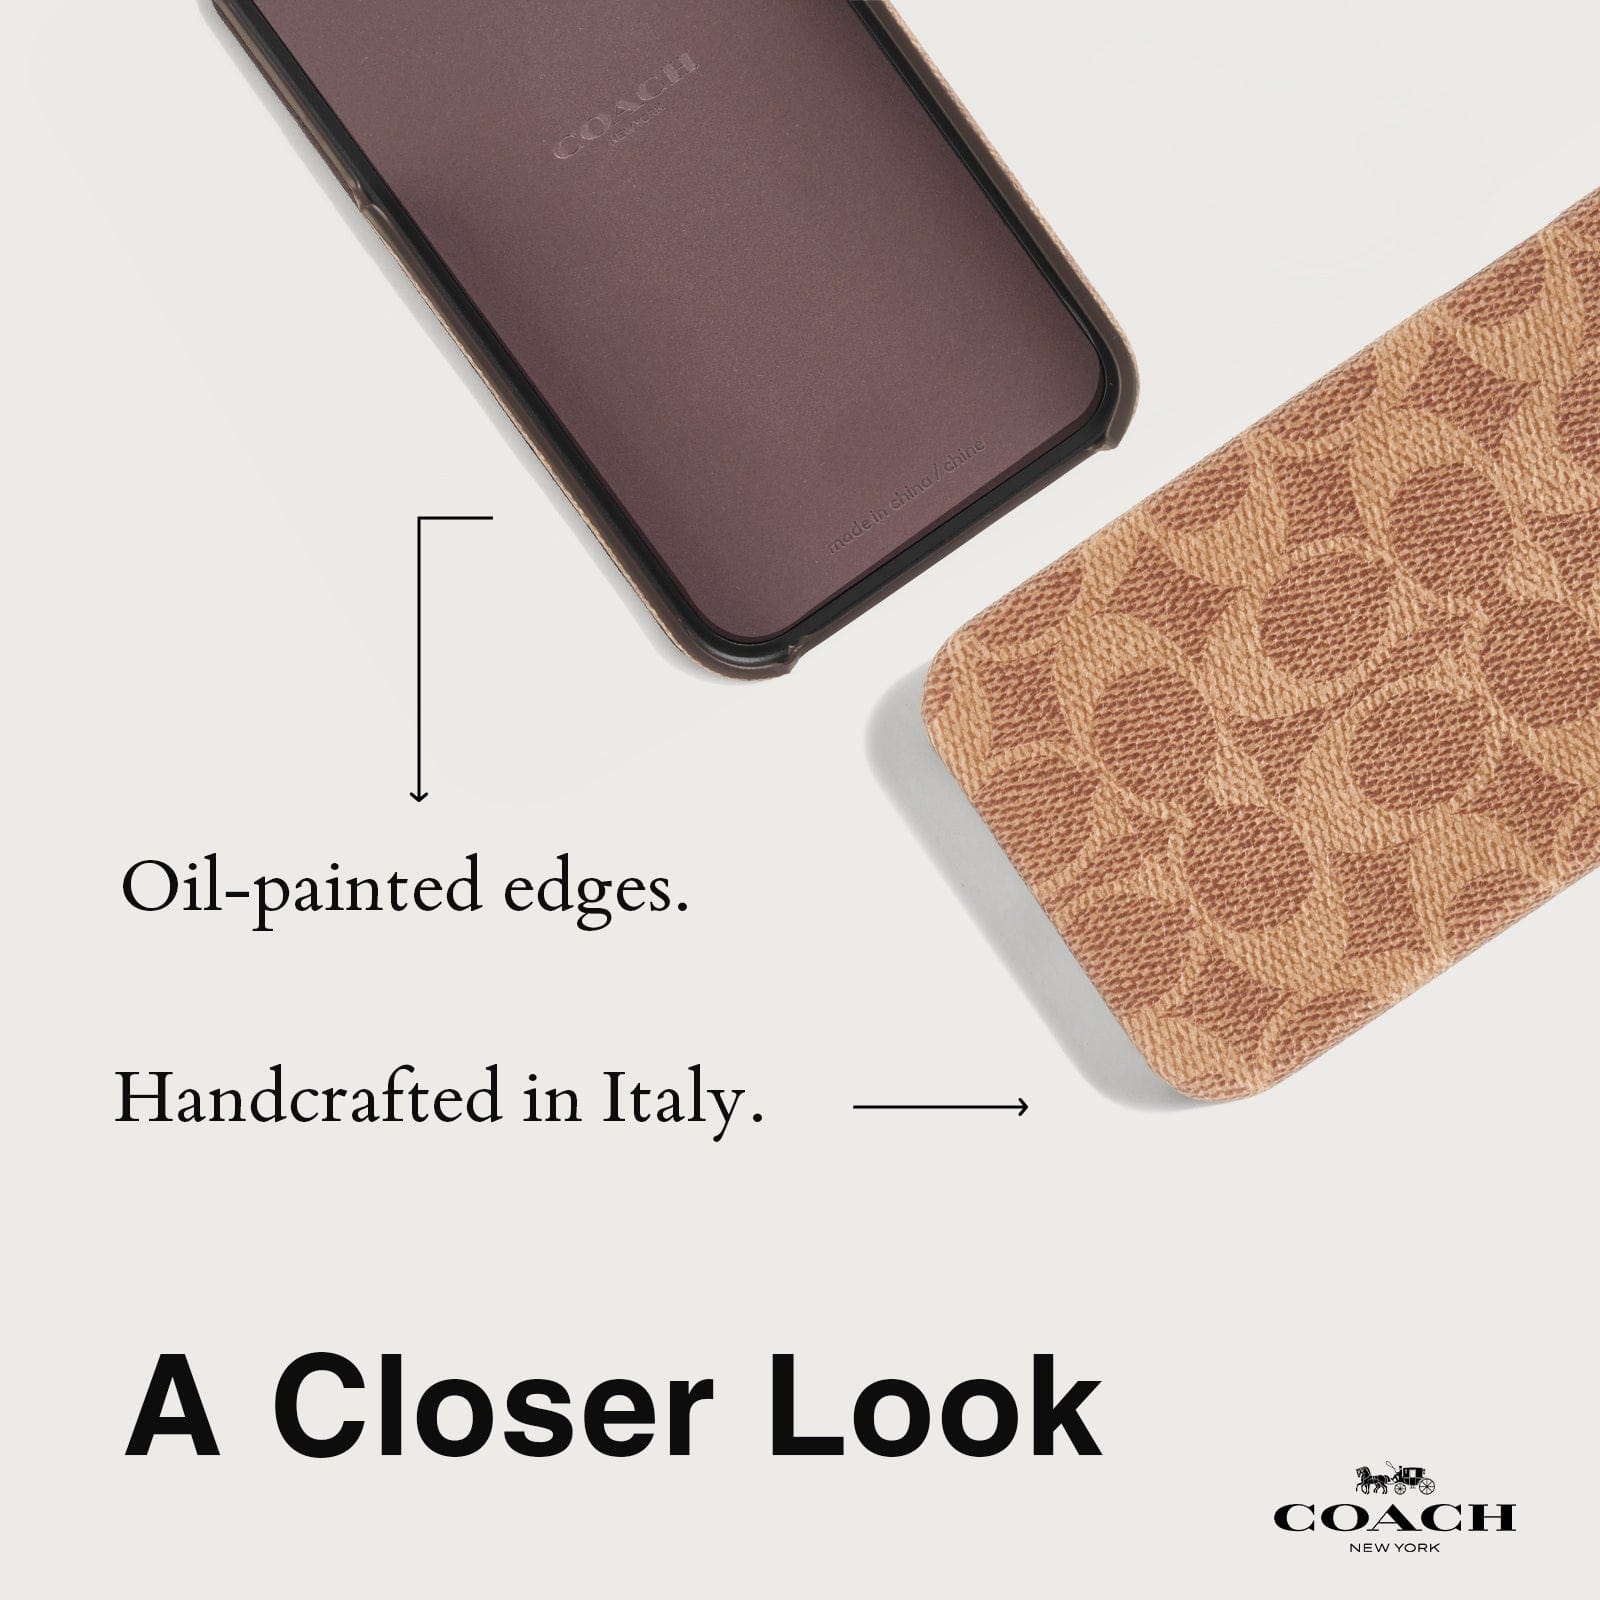 OIL PAINTED EDGES. HANDCRAFTED IN ITALY. A CLOSER LOOK.